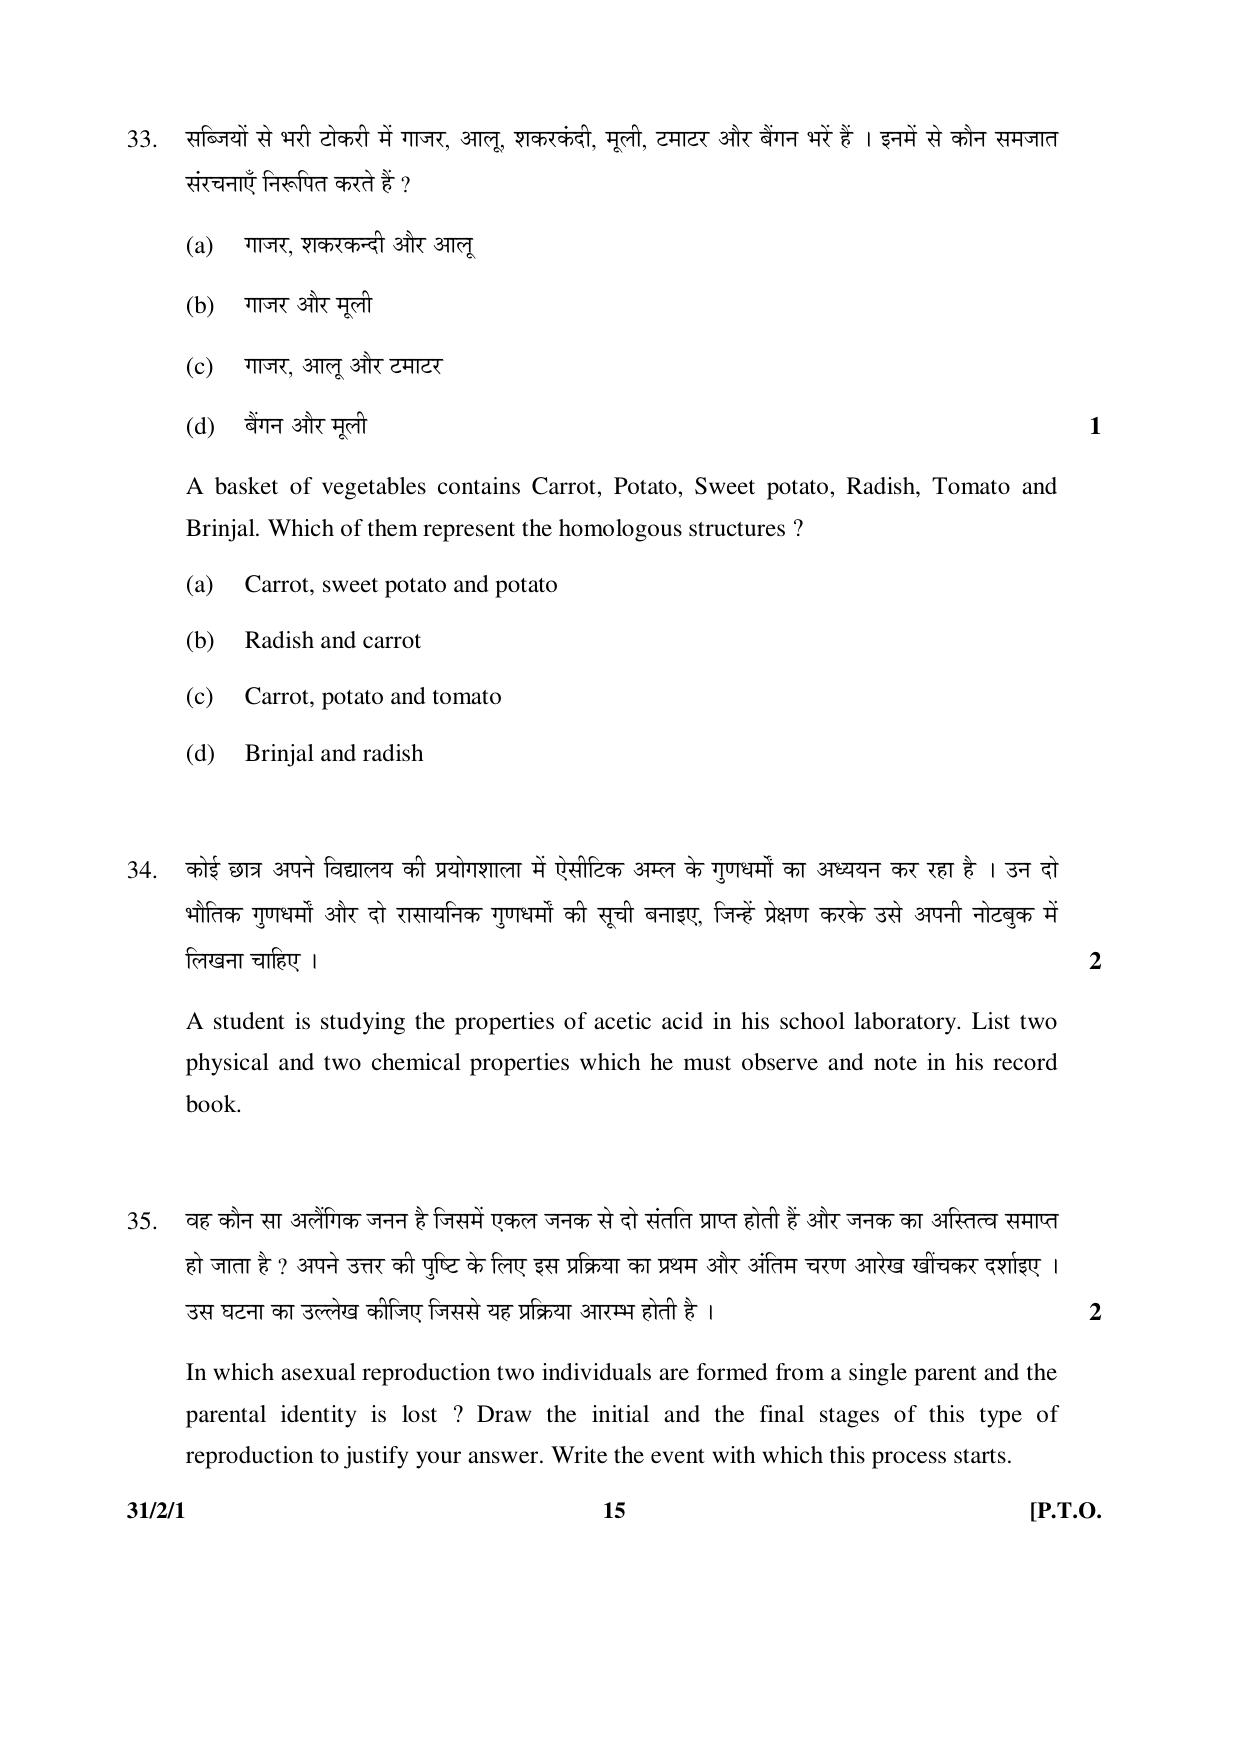 CBSE Class 10 31-2-1 _Science 2016 Question Paper - Page 15